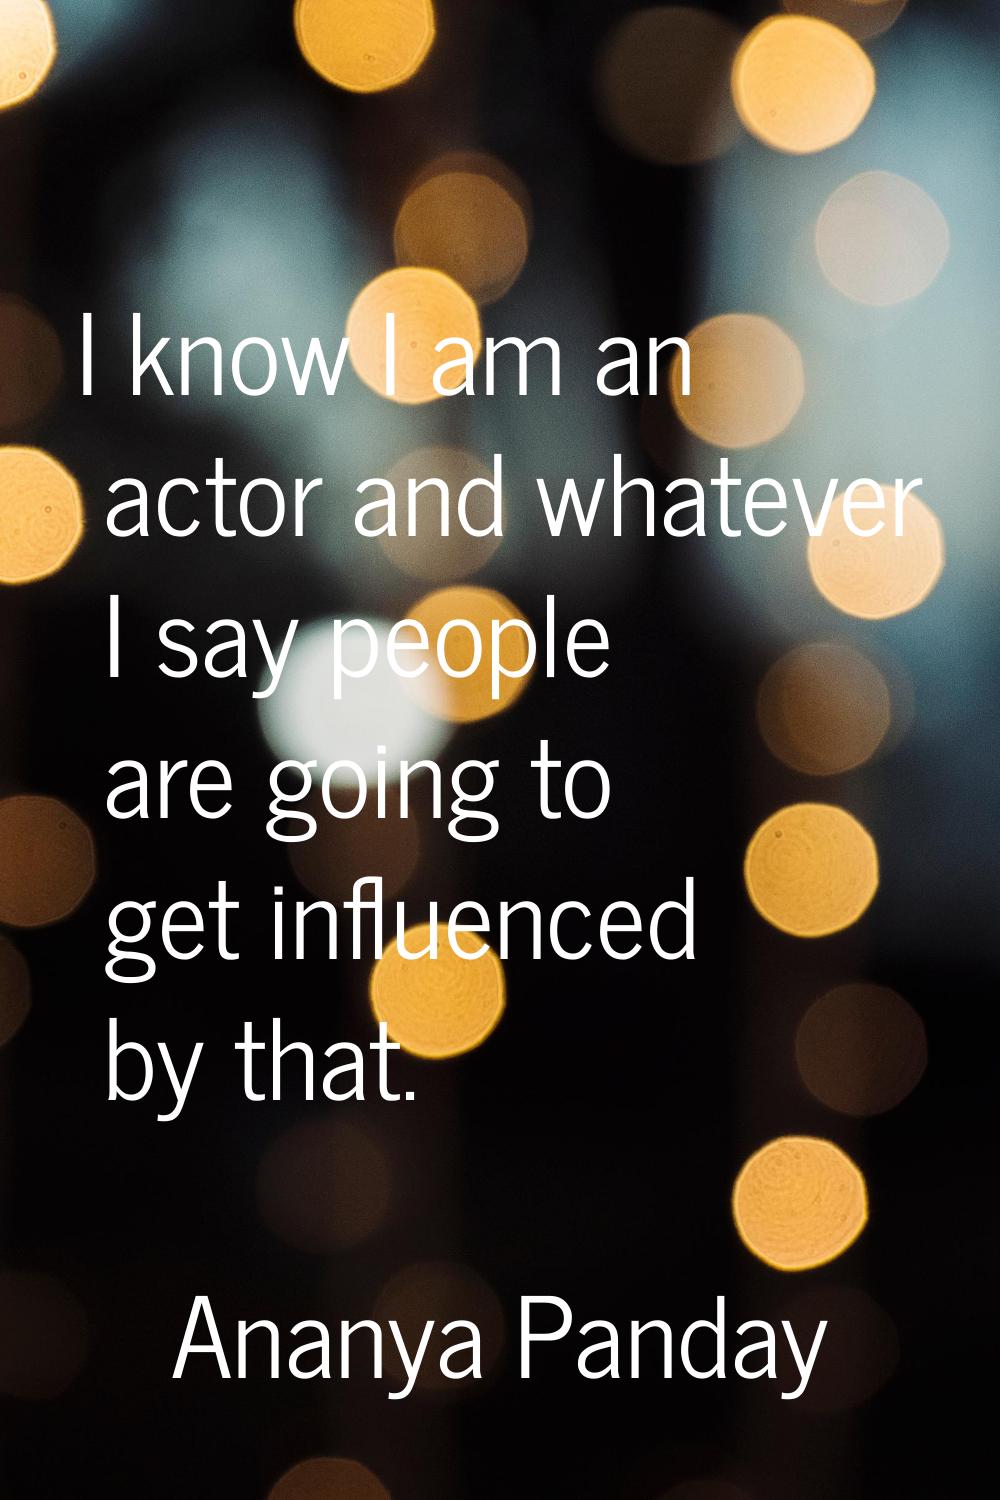 I know I am an actor and whatever I say people are going to get influenced by that.